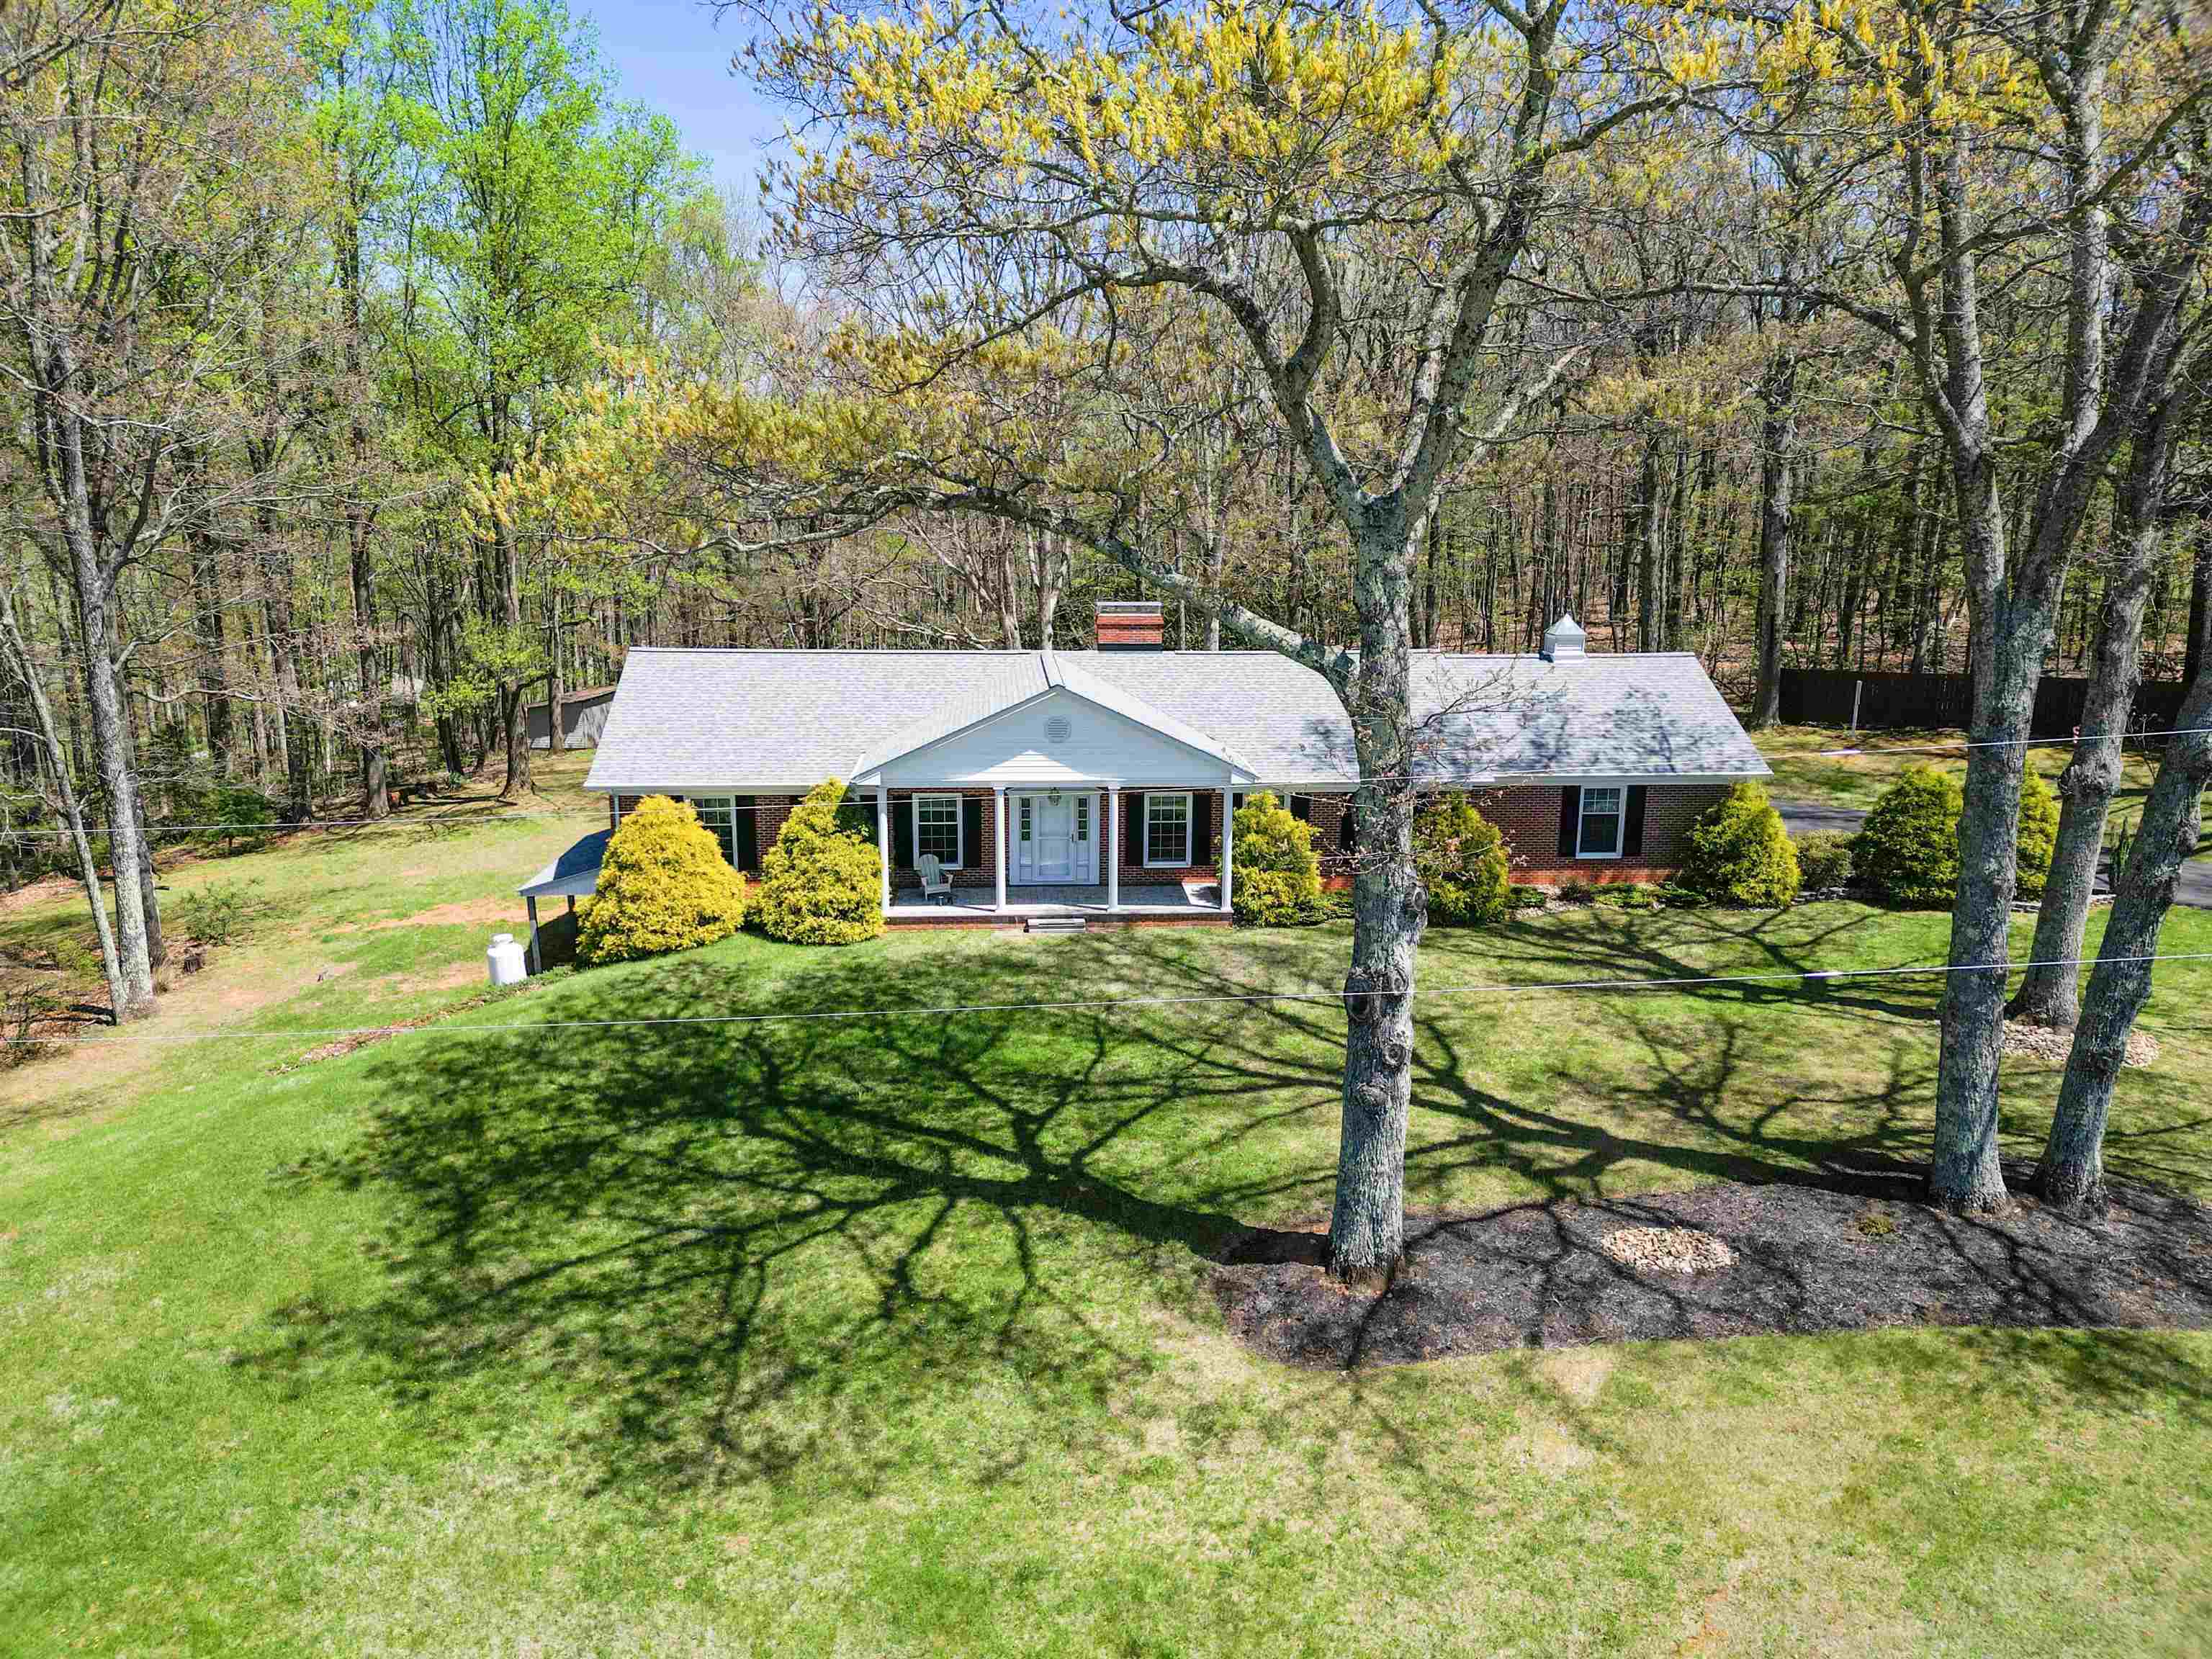 Just a quarter mile off the Blue Ridge Parkway, this move-in ready home is an immaculately maintained brick ranch on 2.83 beautifully landscaped acres. Long range views off the front porch and private views and room to entertain off the covered back deck. Main floor interior has custom cherry cabinets, hardwood floors, propane fireplaces, and granite countertops. Den has rare wormy chestnut beams, cabinets, mantle, and baseboards. Attached 2 car garage with paved driveway. Large finished basement is possible in-law suite or second income with walk-out separate entrance, bedroom/office space, full bath, den with fireplace, woodstove, and kitchen. Huge attic is floored walkable for good storage. Large storage building w potting shed. Two good wells. High speed fiber optic internet. 8 Camera security system available. New roof "22. Room for garden spaces and strolling paths. Only 5.6 miles from the town of Floyd. Click on "Unbranded Media" above for 360 degree view of main floor.